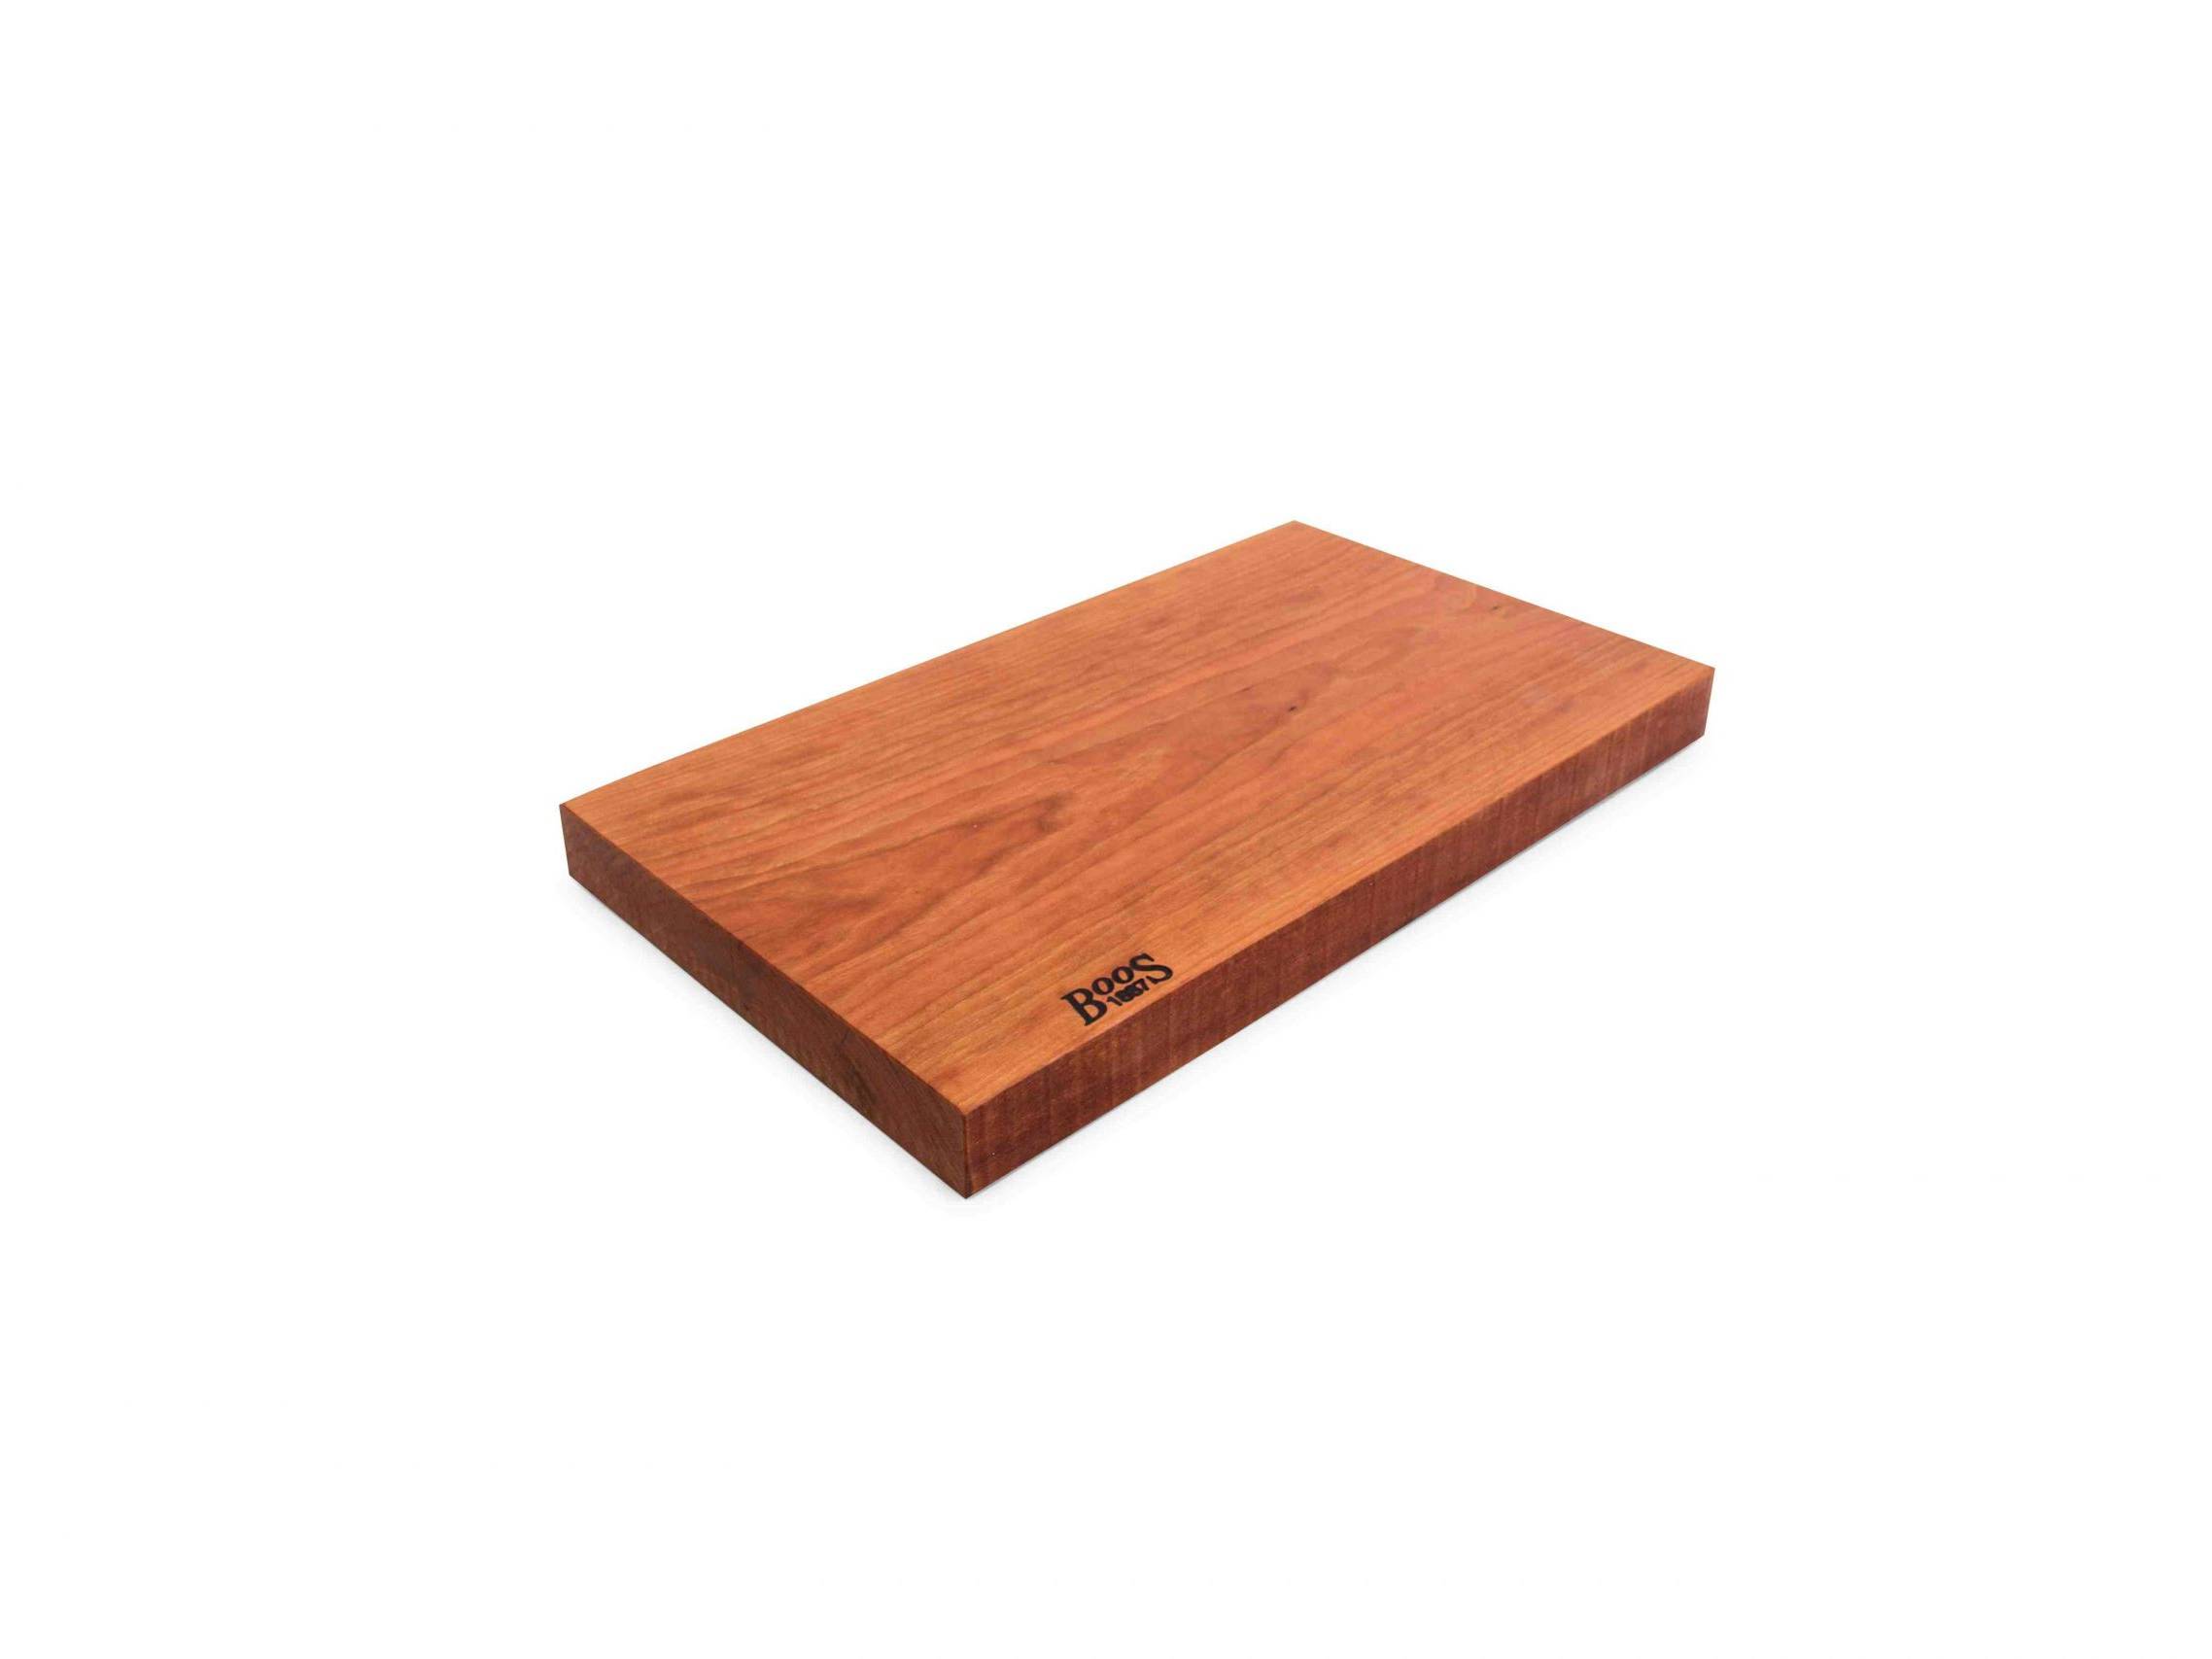 Boos 1887 / Rustic Edge one piece cutting board; American Cherry; can be used on both sides 69